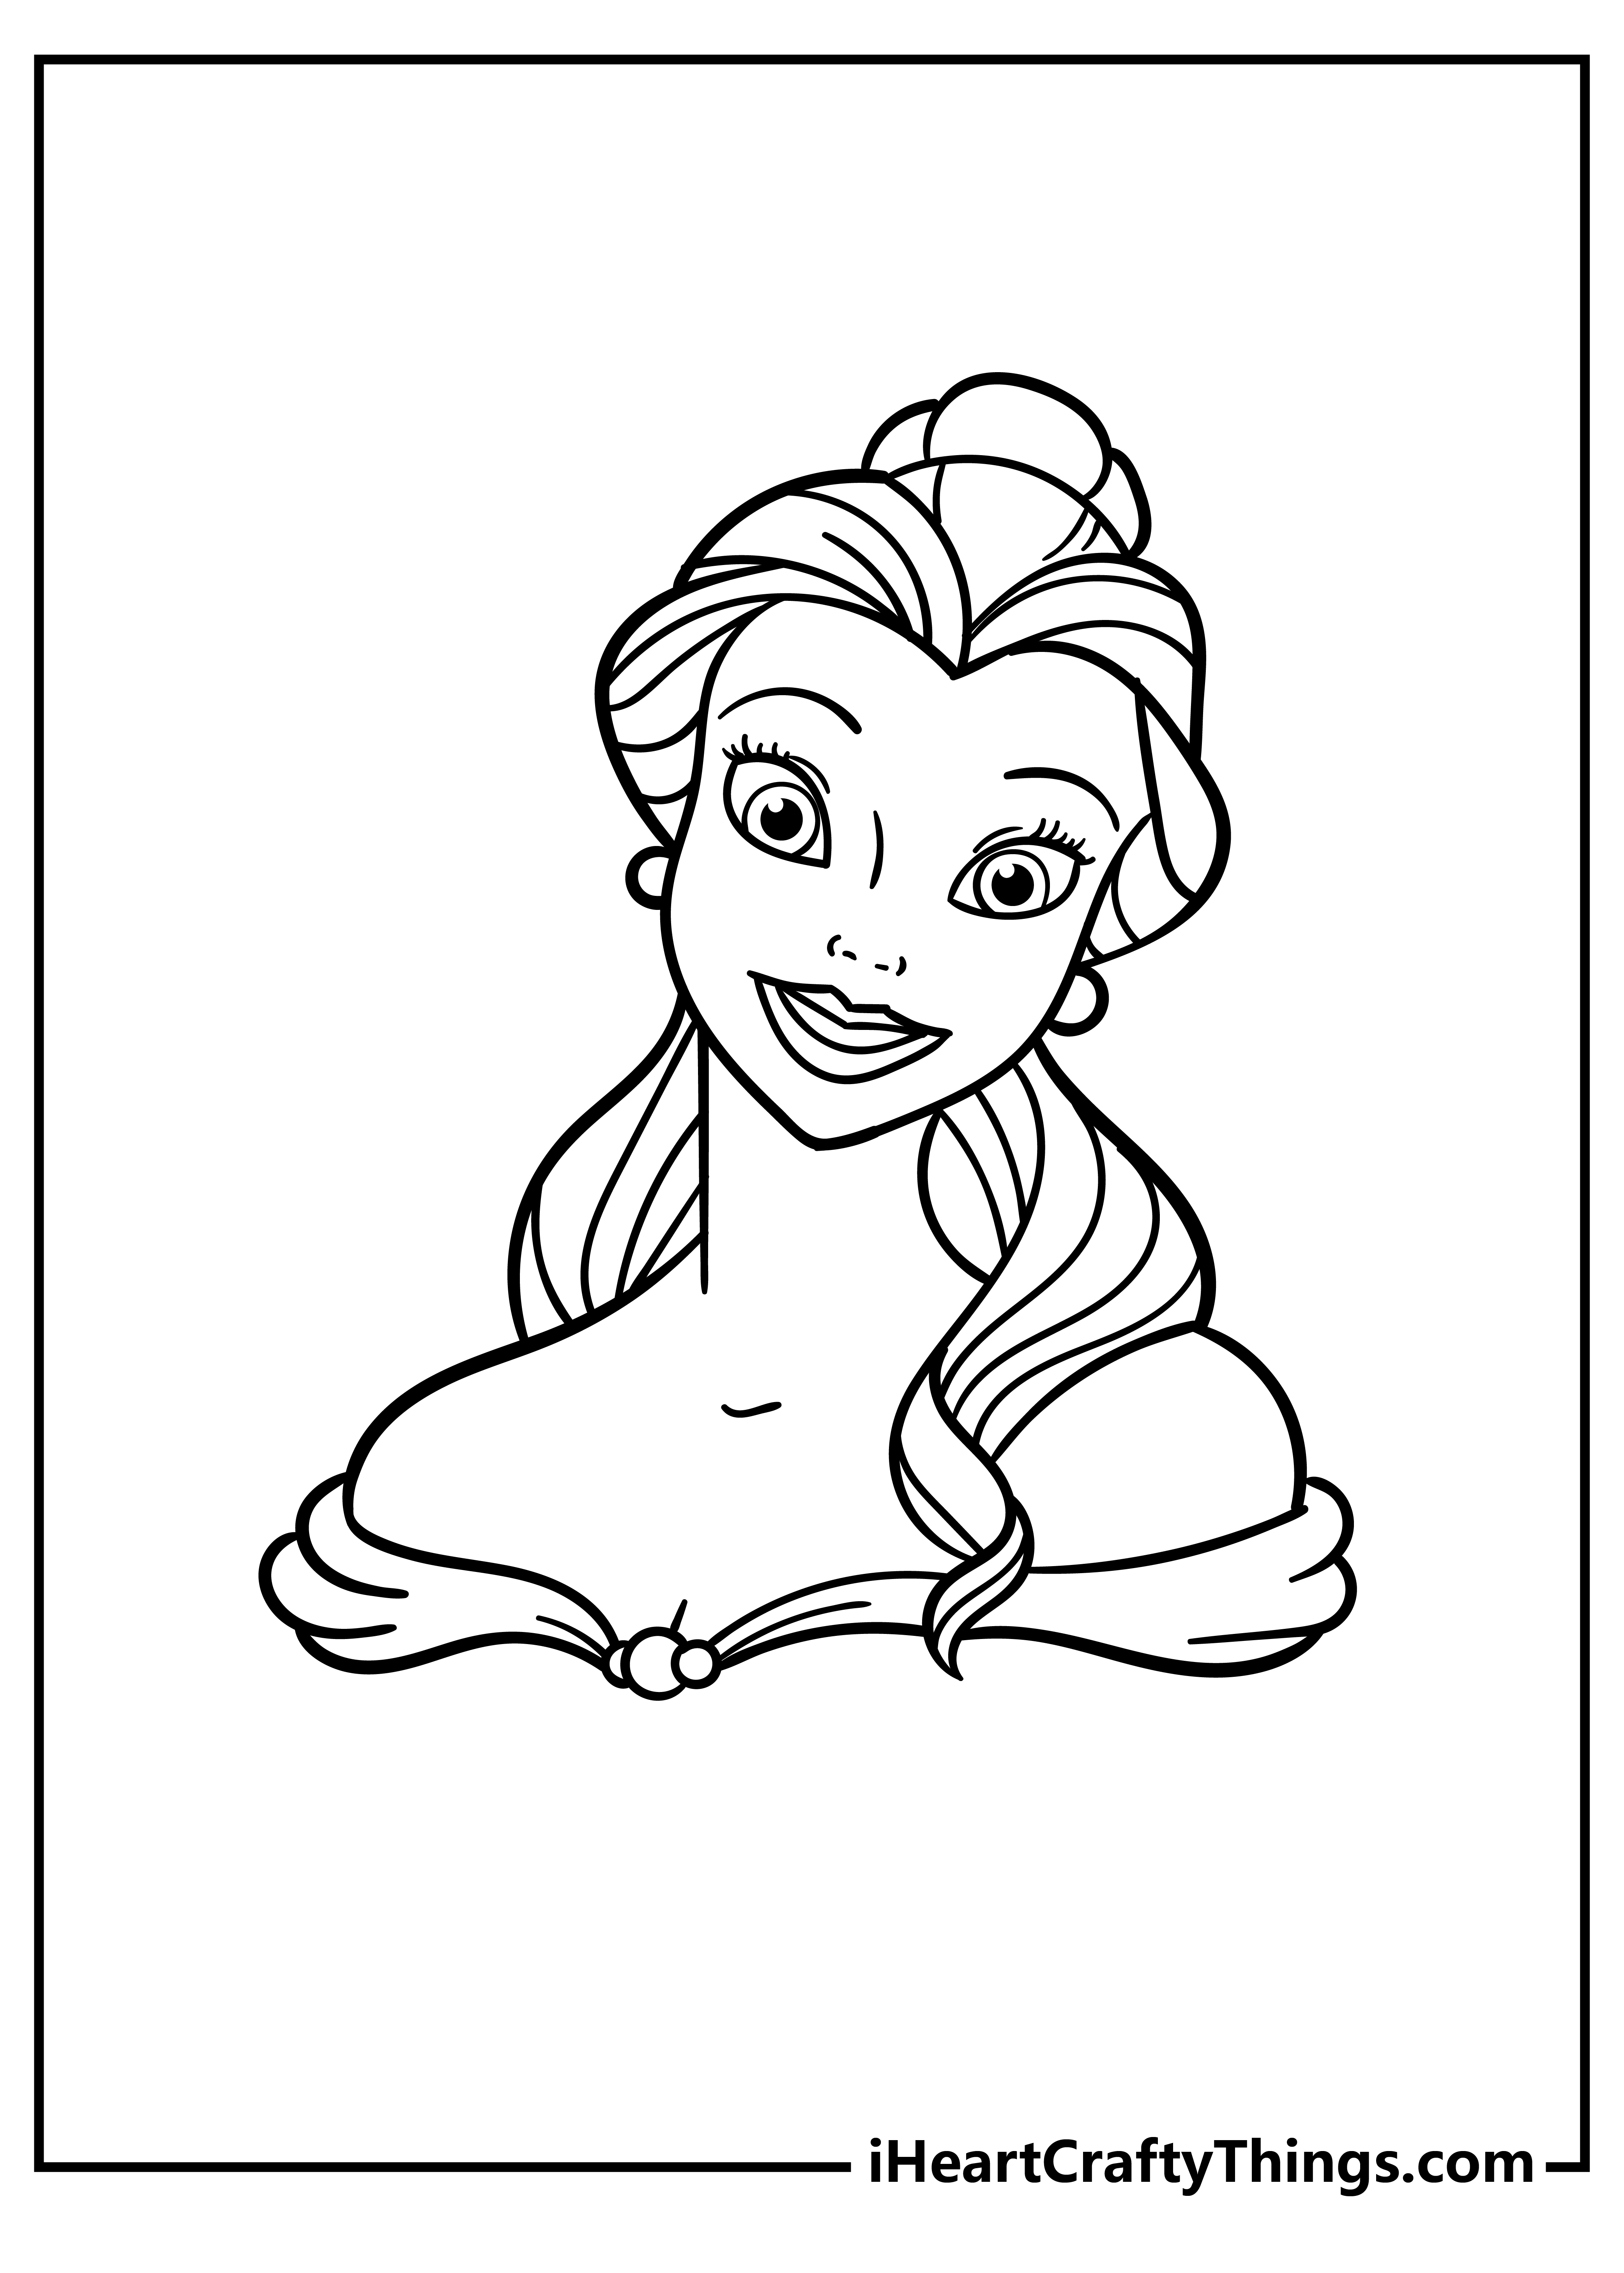 Beauty and the Beast Coloring Book for adults free download